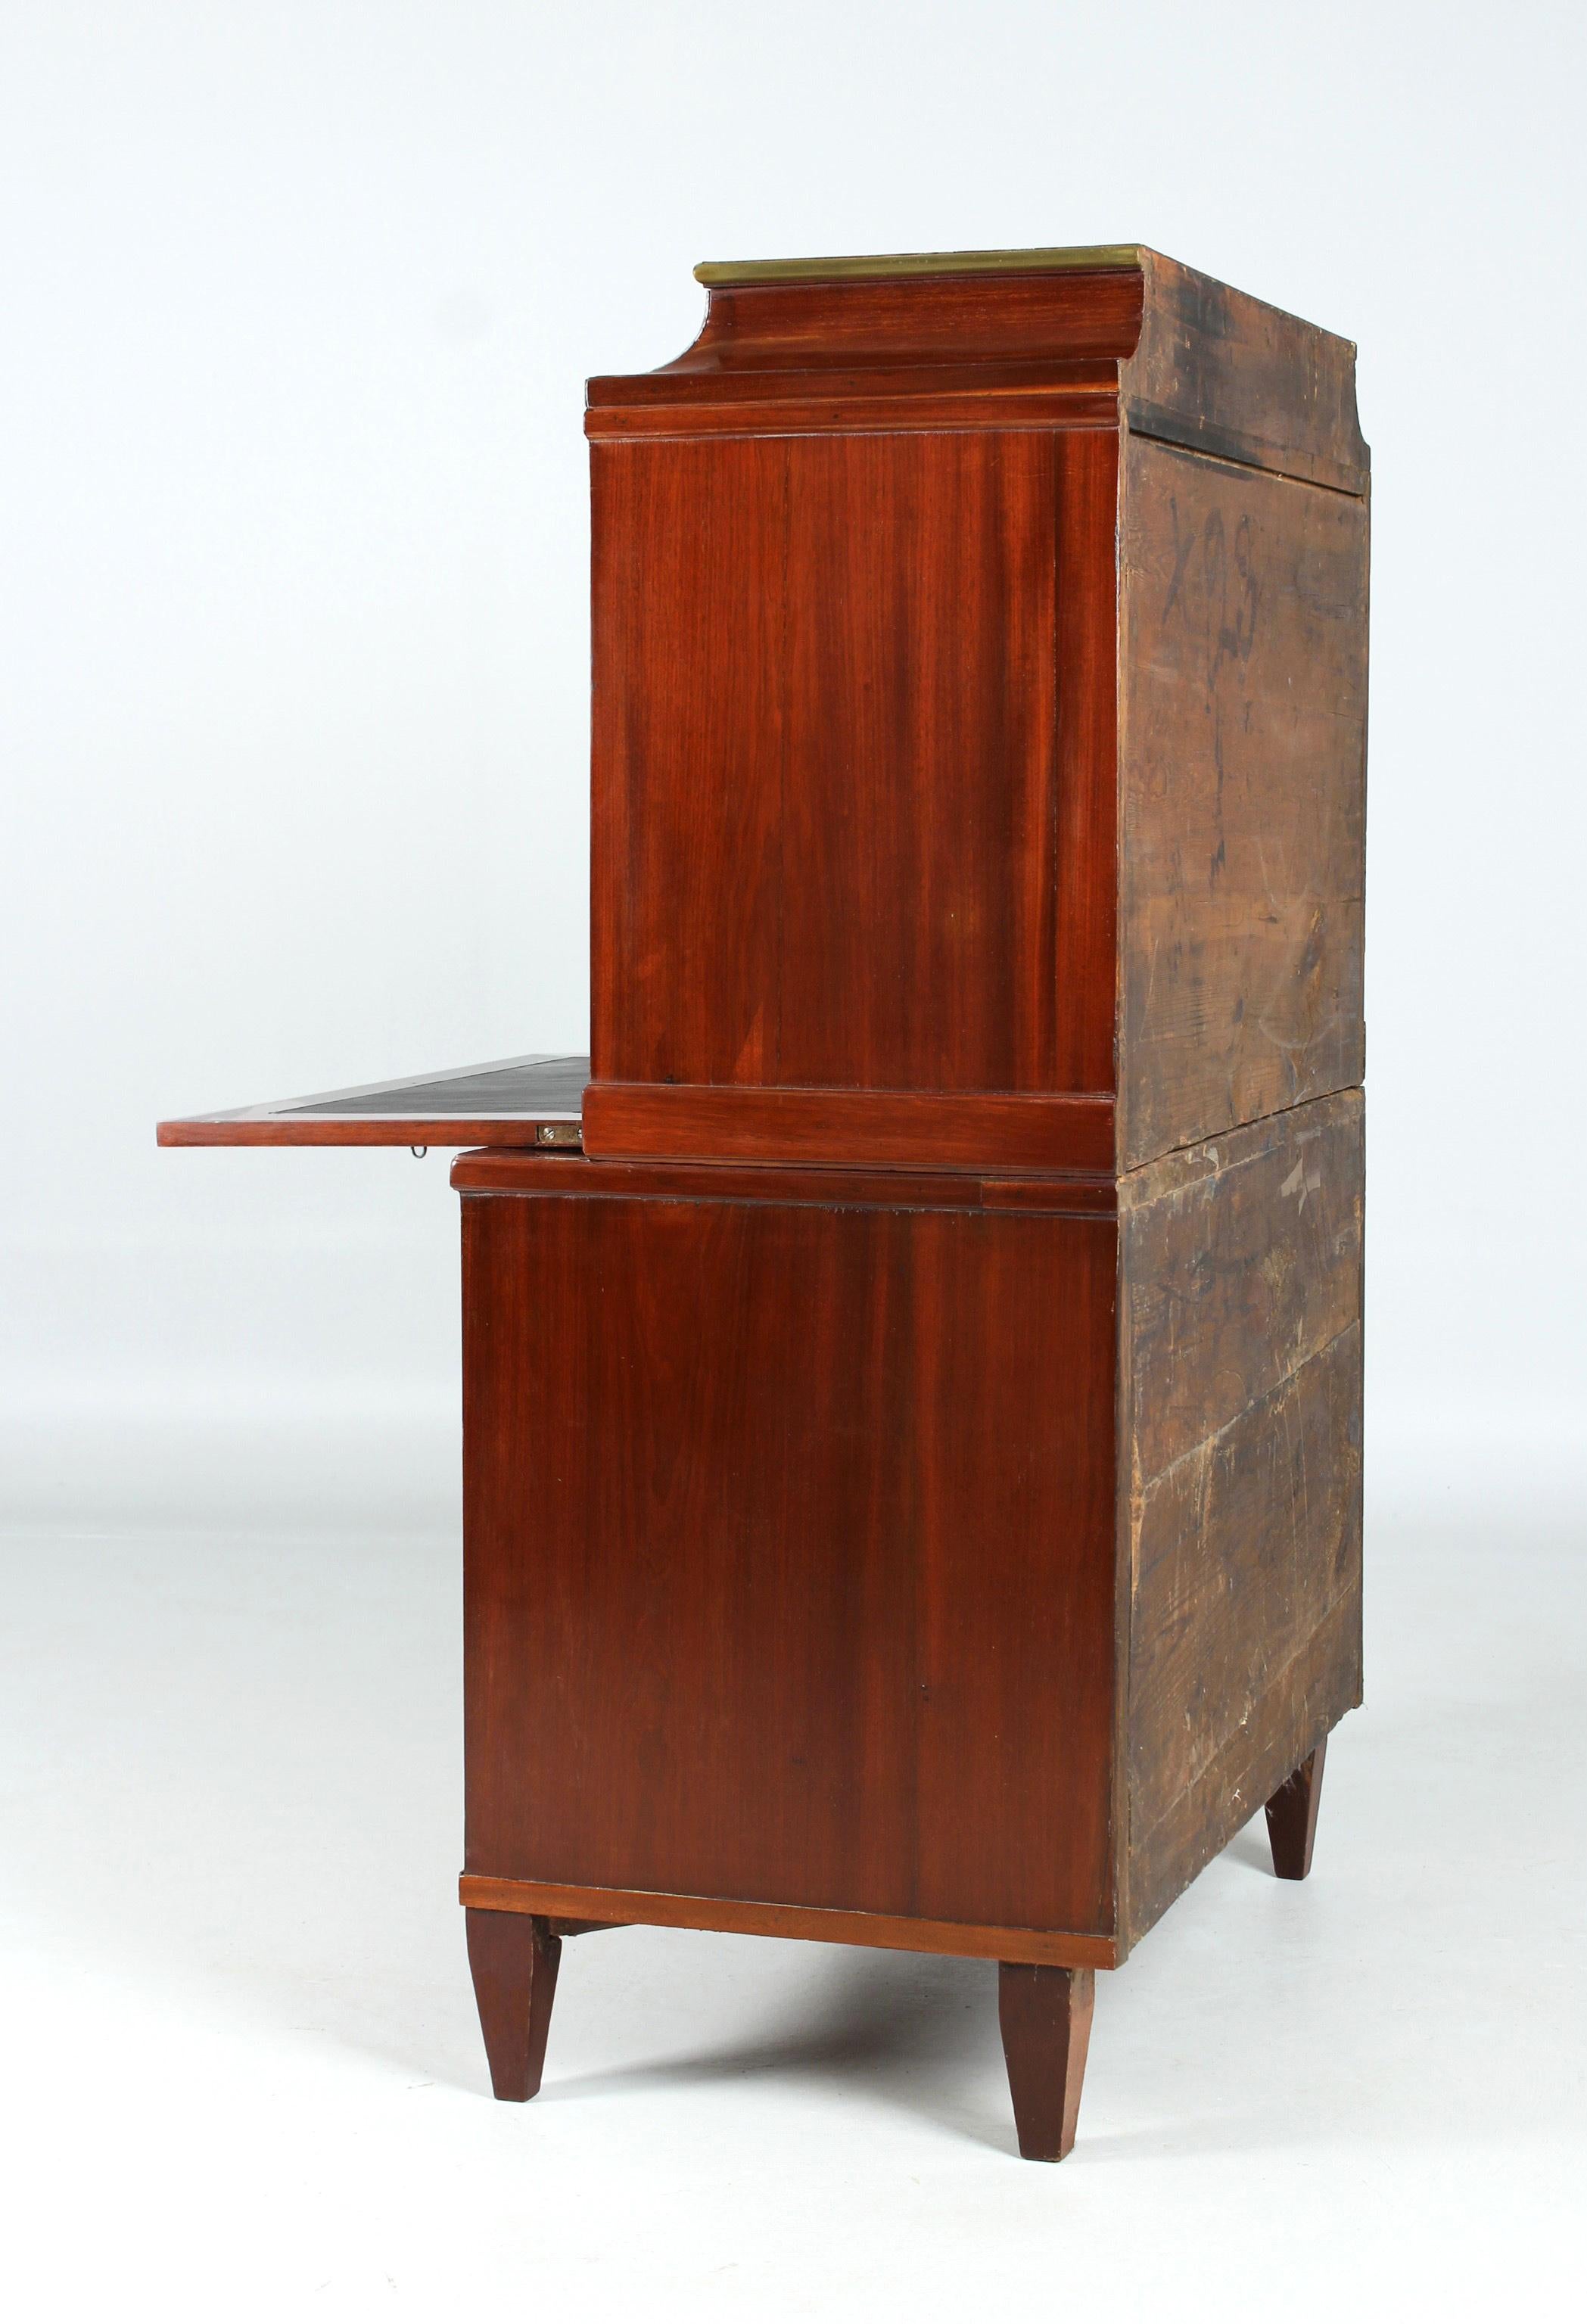 Late 18th or Early 19th Century Secretary with Hidden Mechanisms, Mahogany For Sale 10